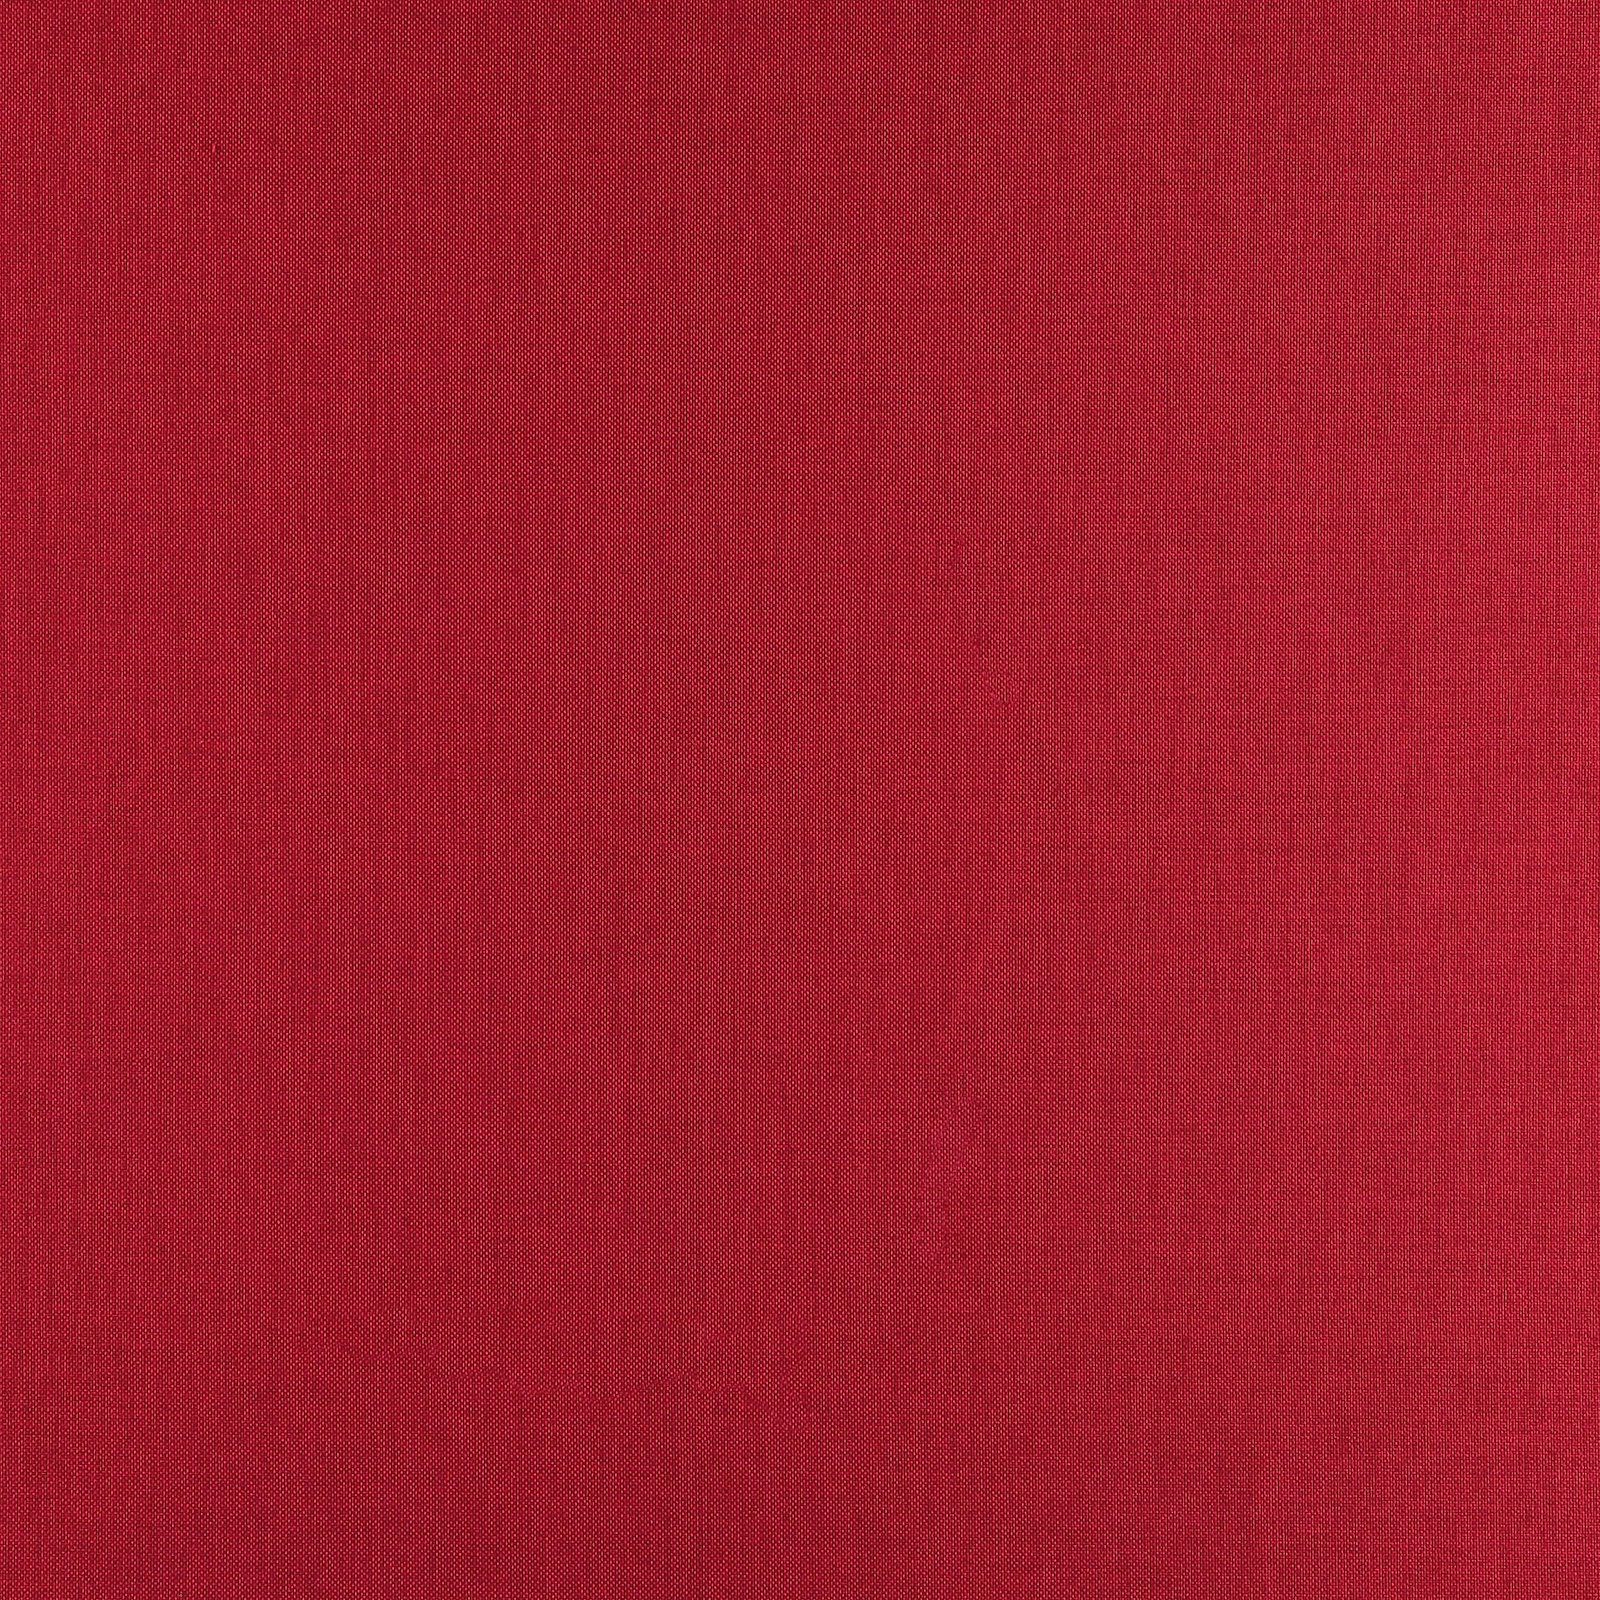 Upholstery fabric red 820979_pack_solid